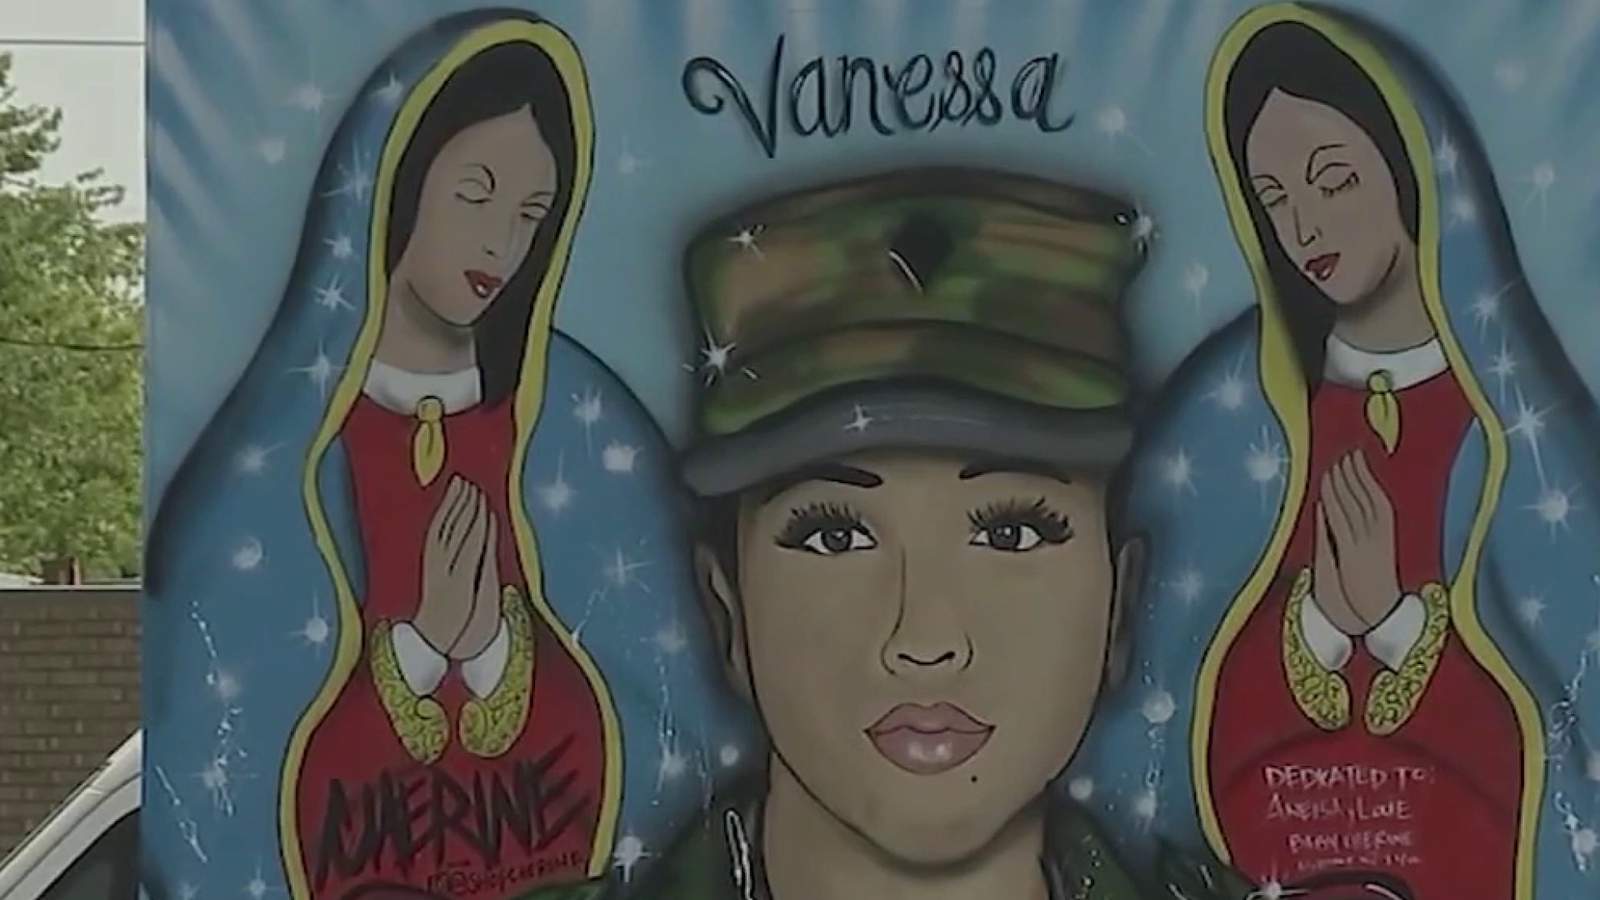 Fort Hood honors Vanessa Guillen, family with special service at Fort Hood chapel